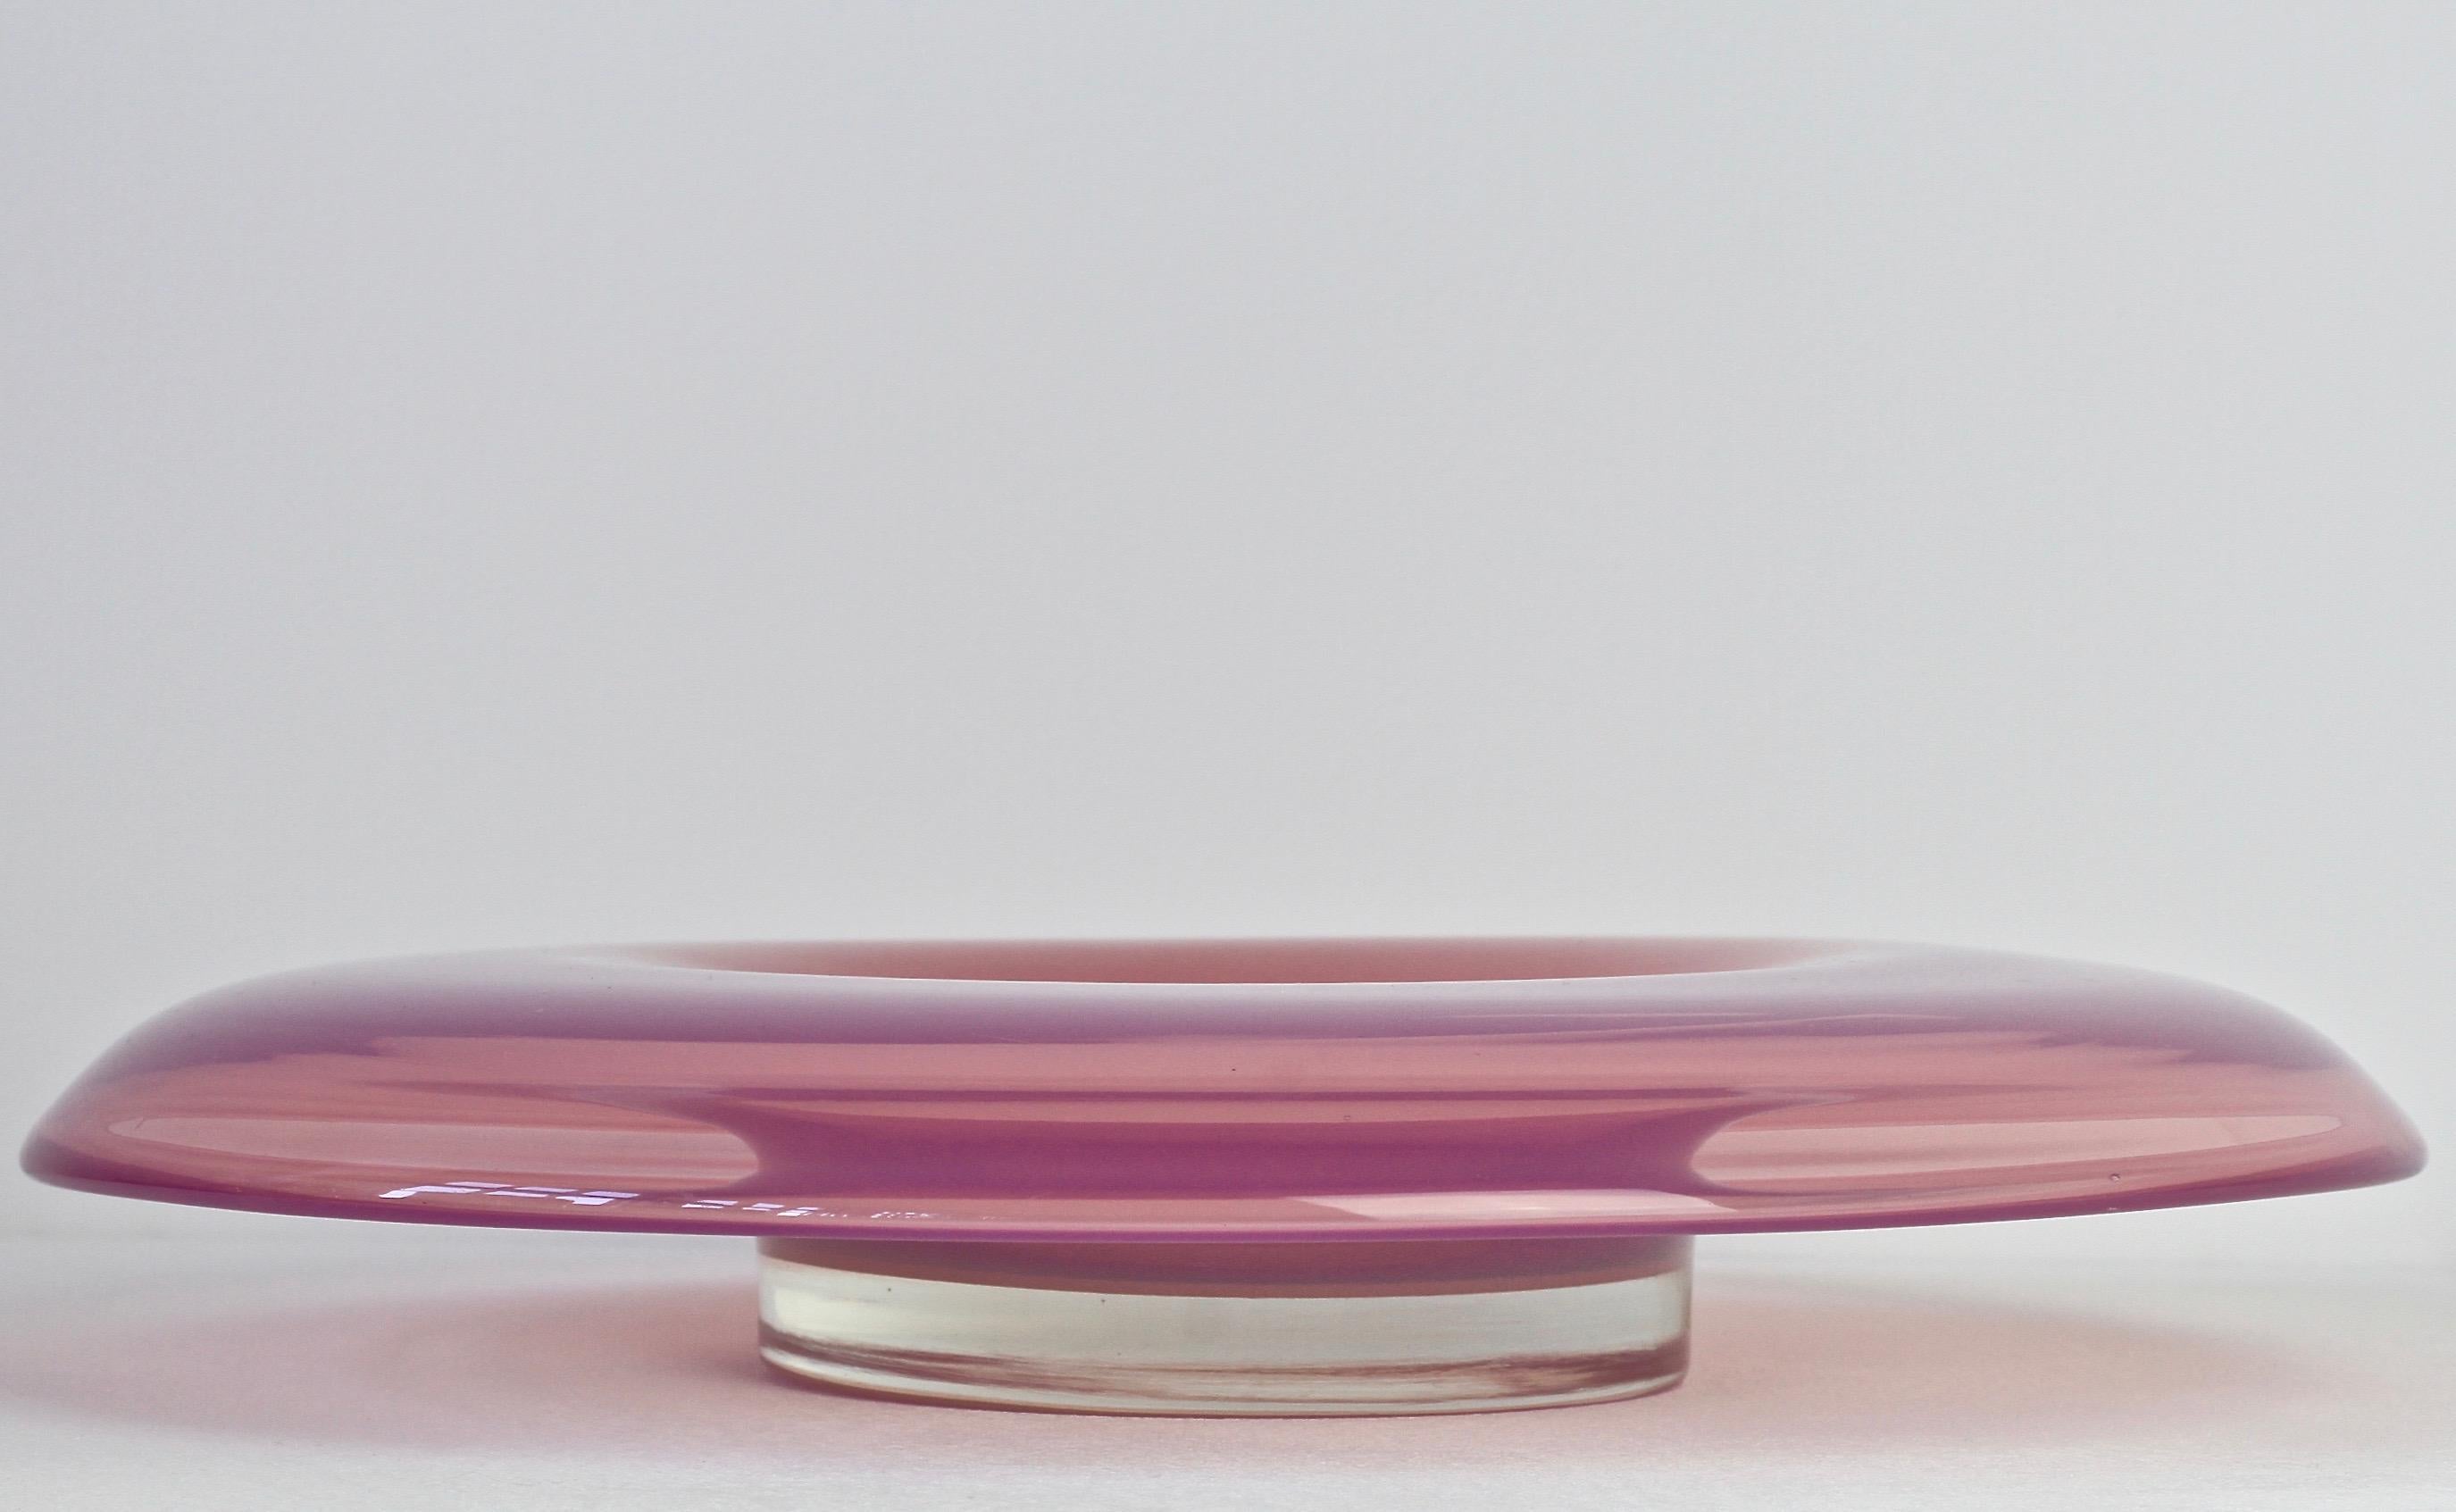 Signed Murano glass serving or dipping bowl by Cenedese, circa 1960s. Wonderful translucent color of vibrant pink. Simplistic yet elegant forms - almost futuristic. Very fun to dine with the vibrant Murano glassware.

The bowl measure